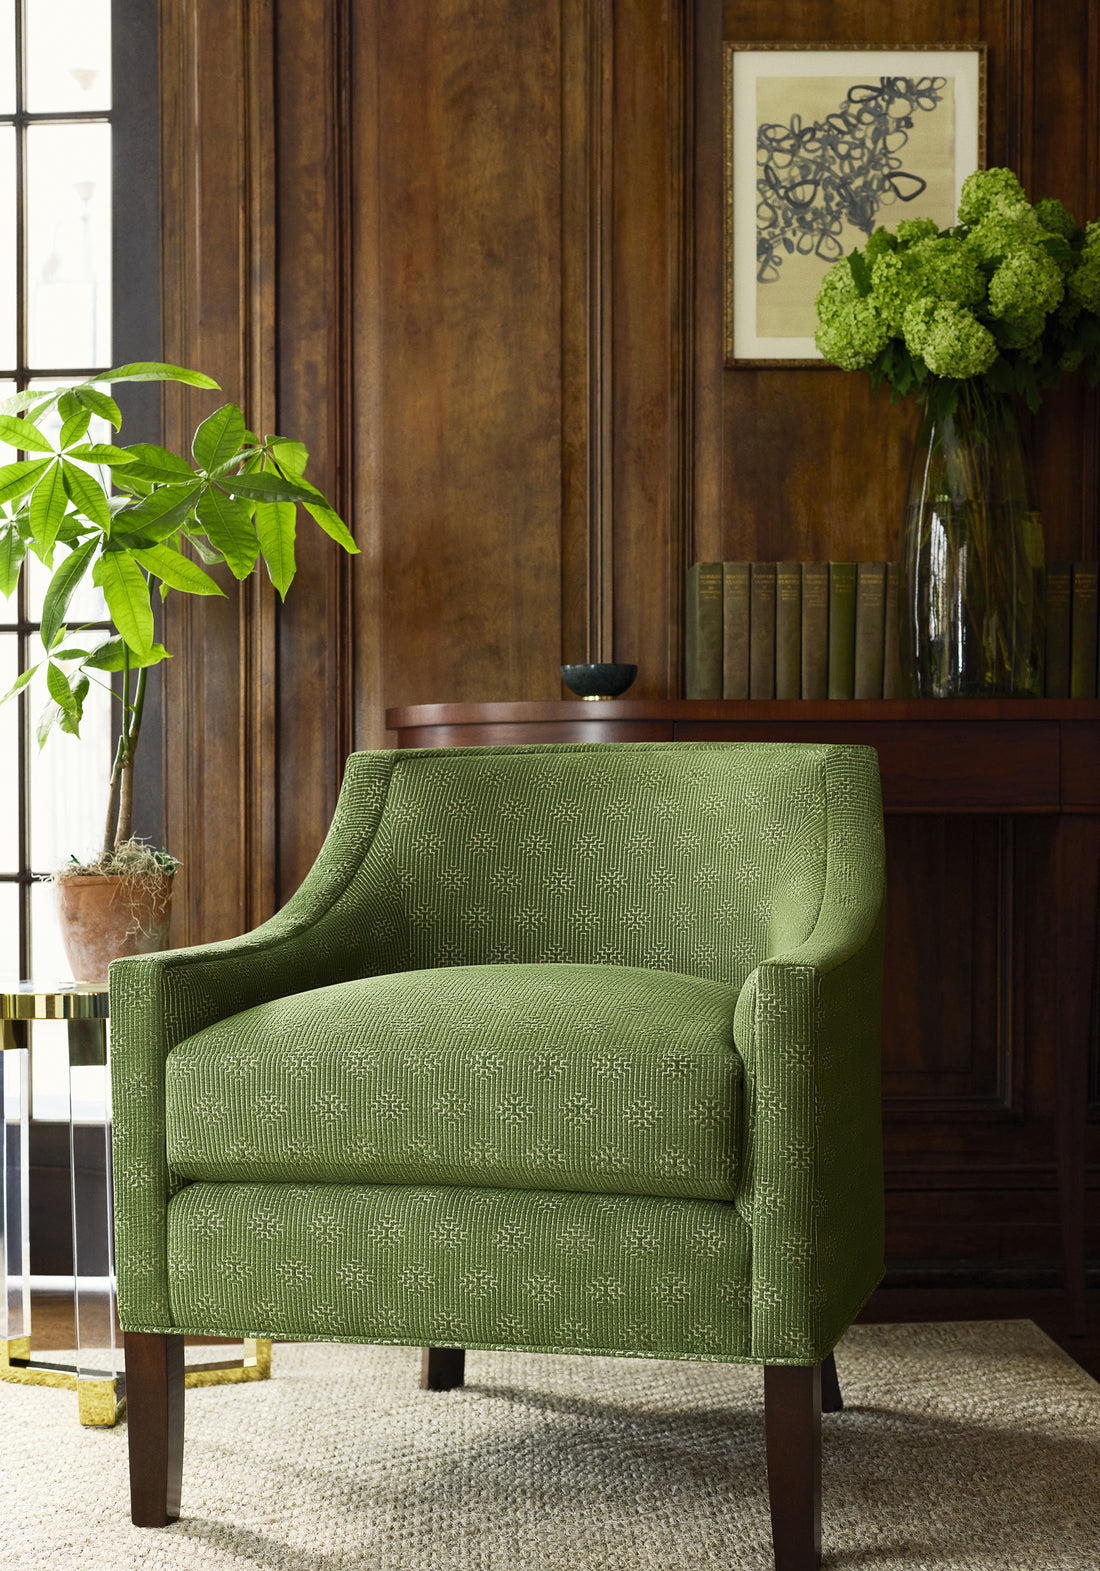 Everett Chair in Crete woven fabric in olive color - pattern number W74211 - by Thibaut in the Passage collection